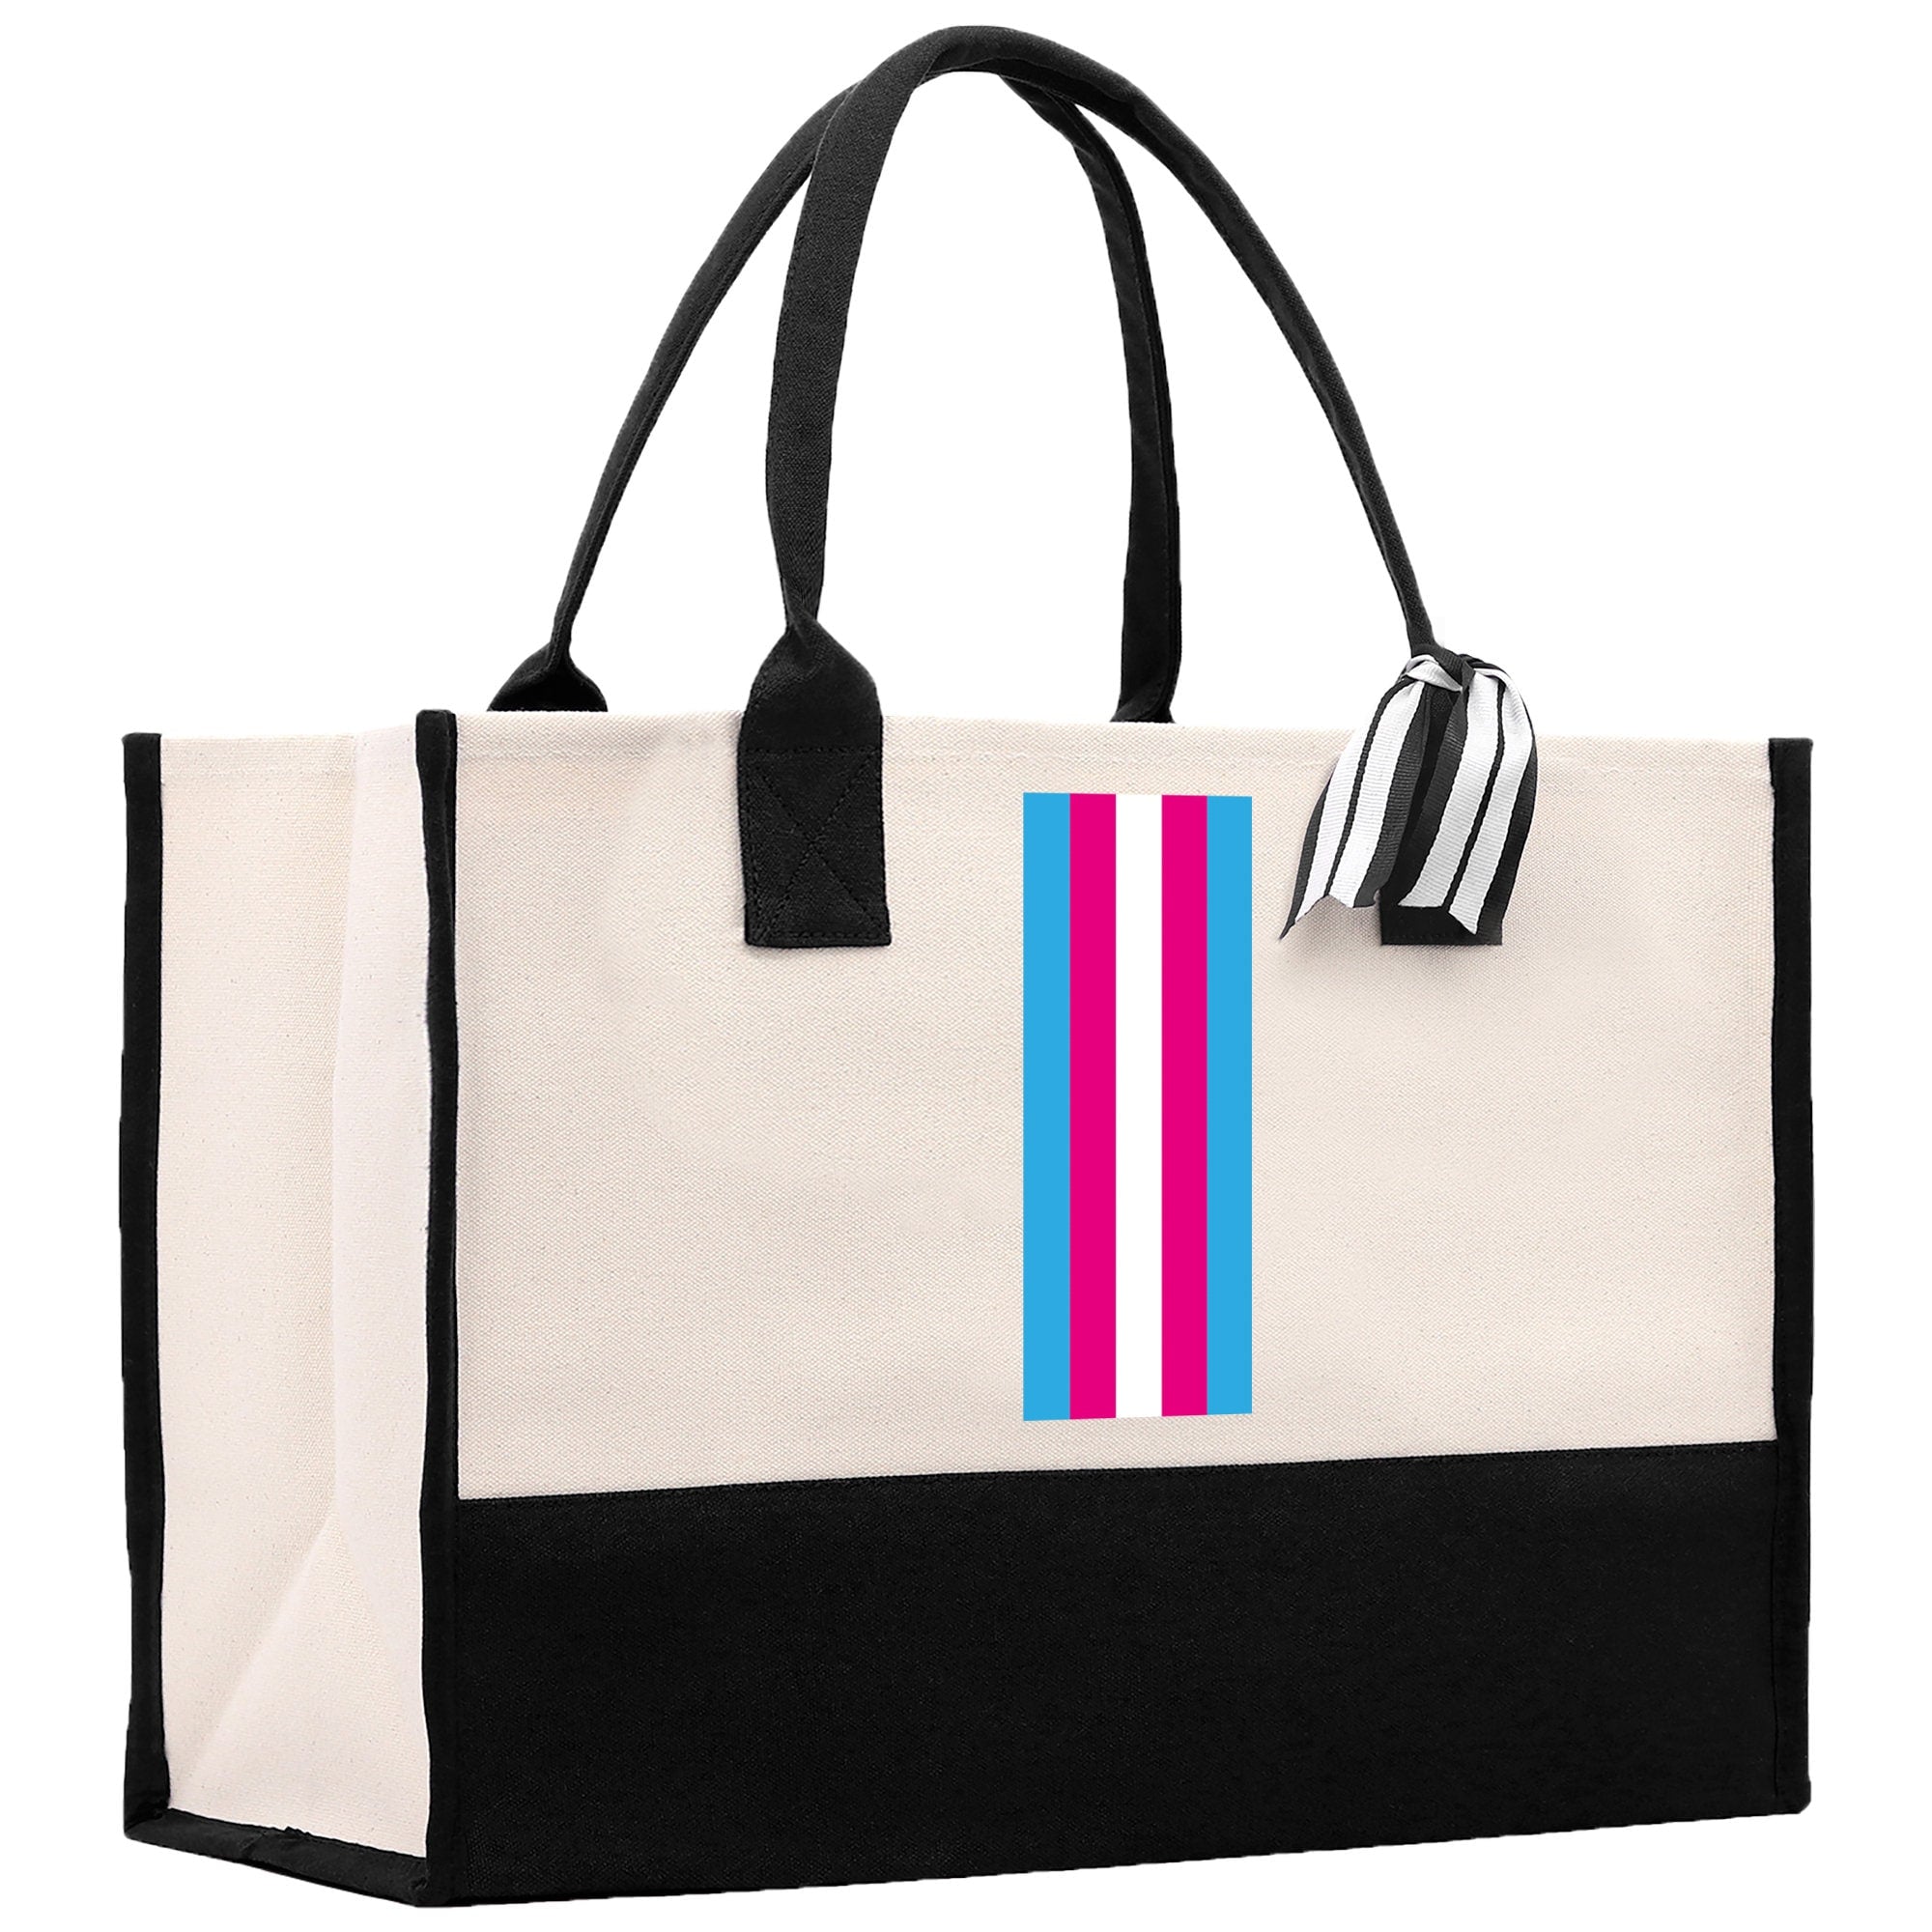 a black and white bag with a pink and blue stripe